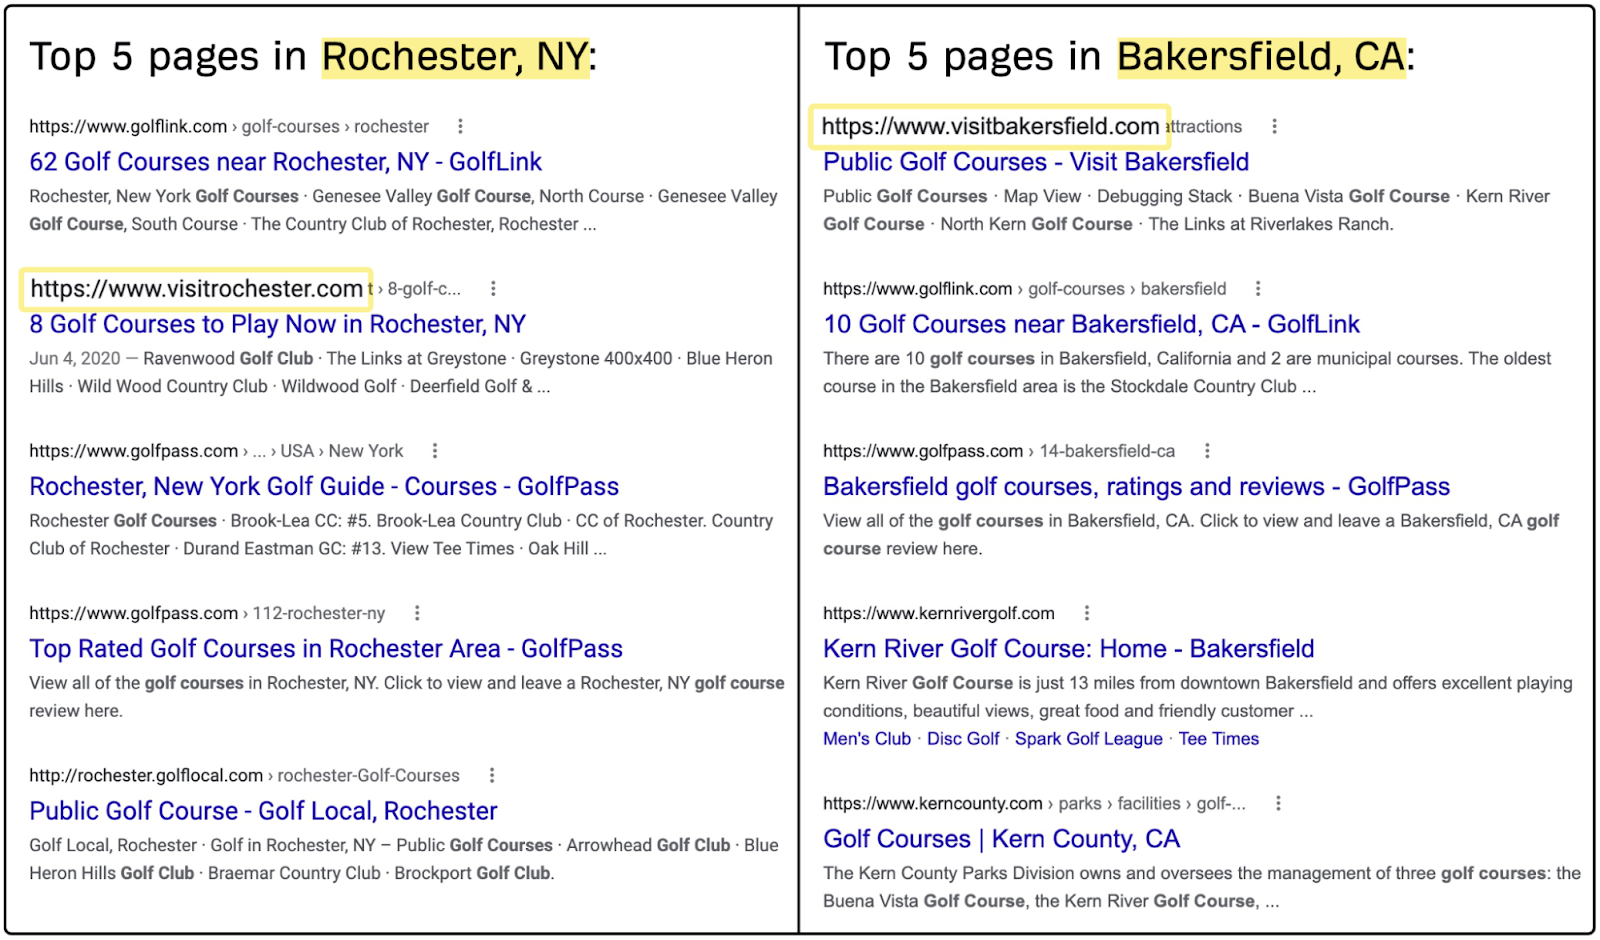 Top 5 pages in Rochester and Bakersfield, respectively